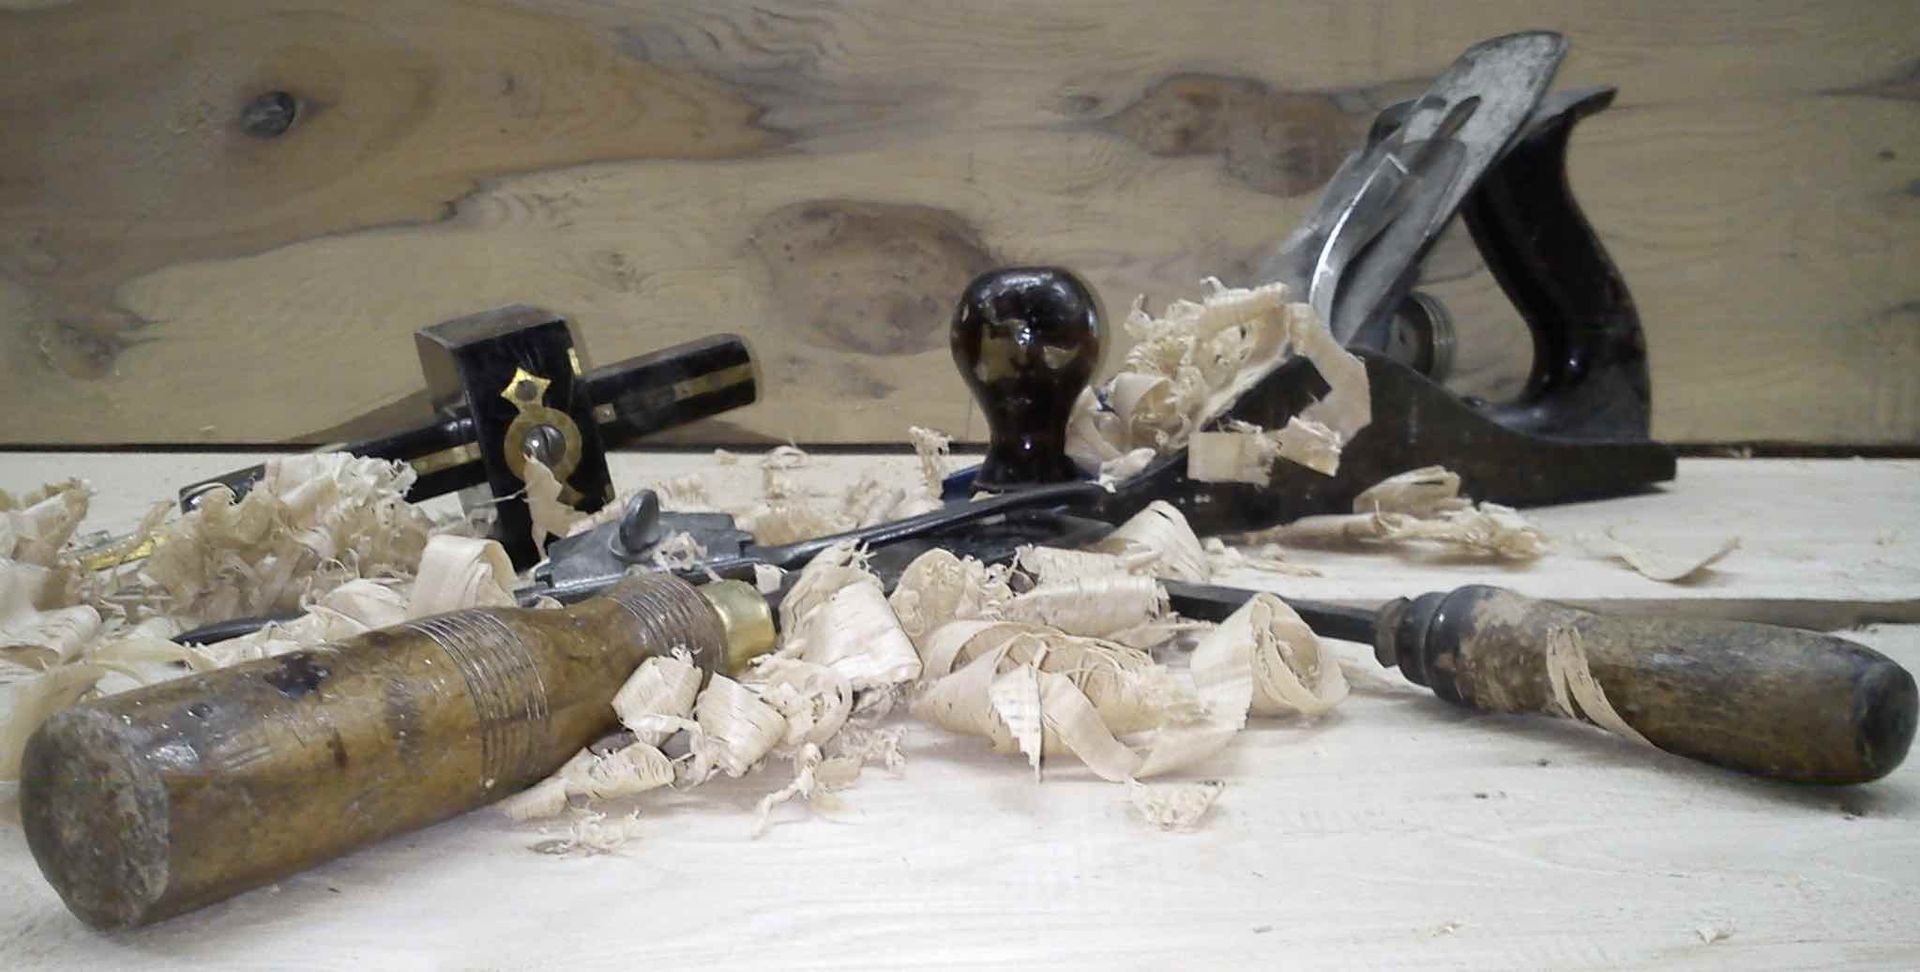 Image of hand tools